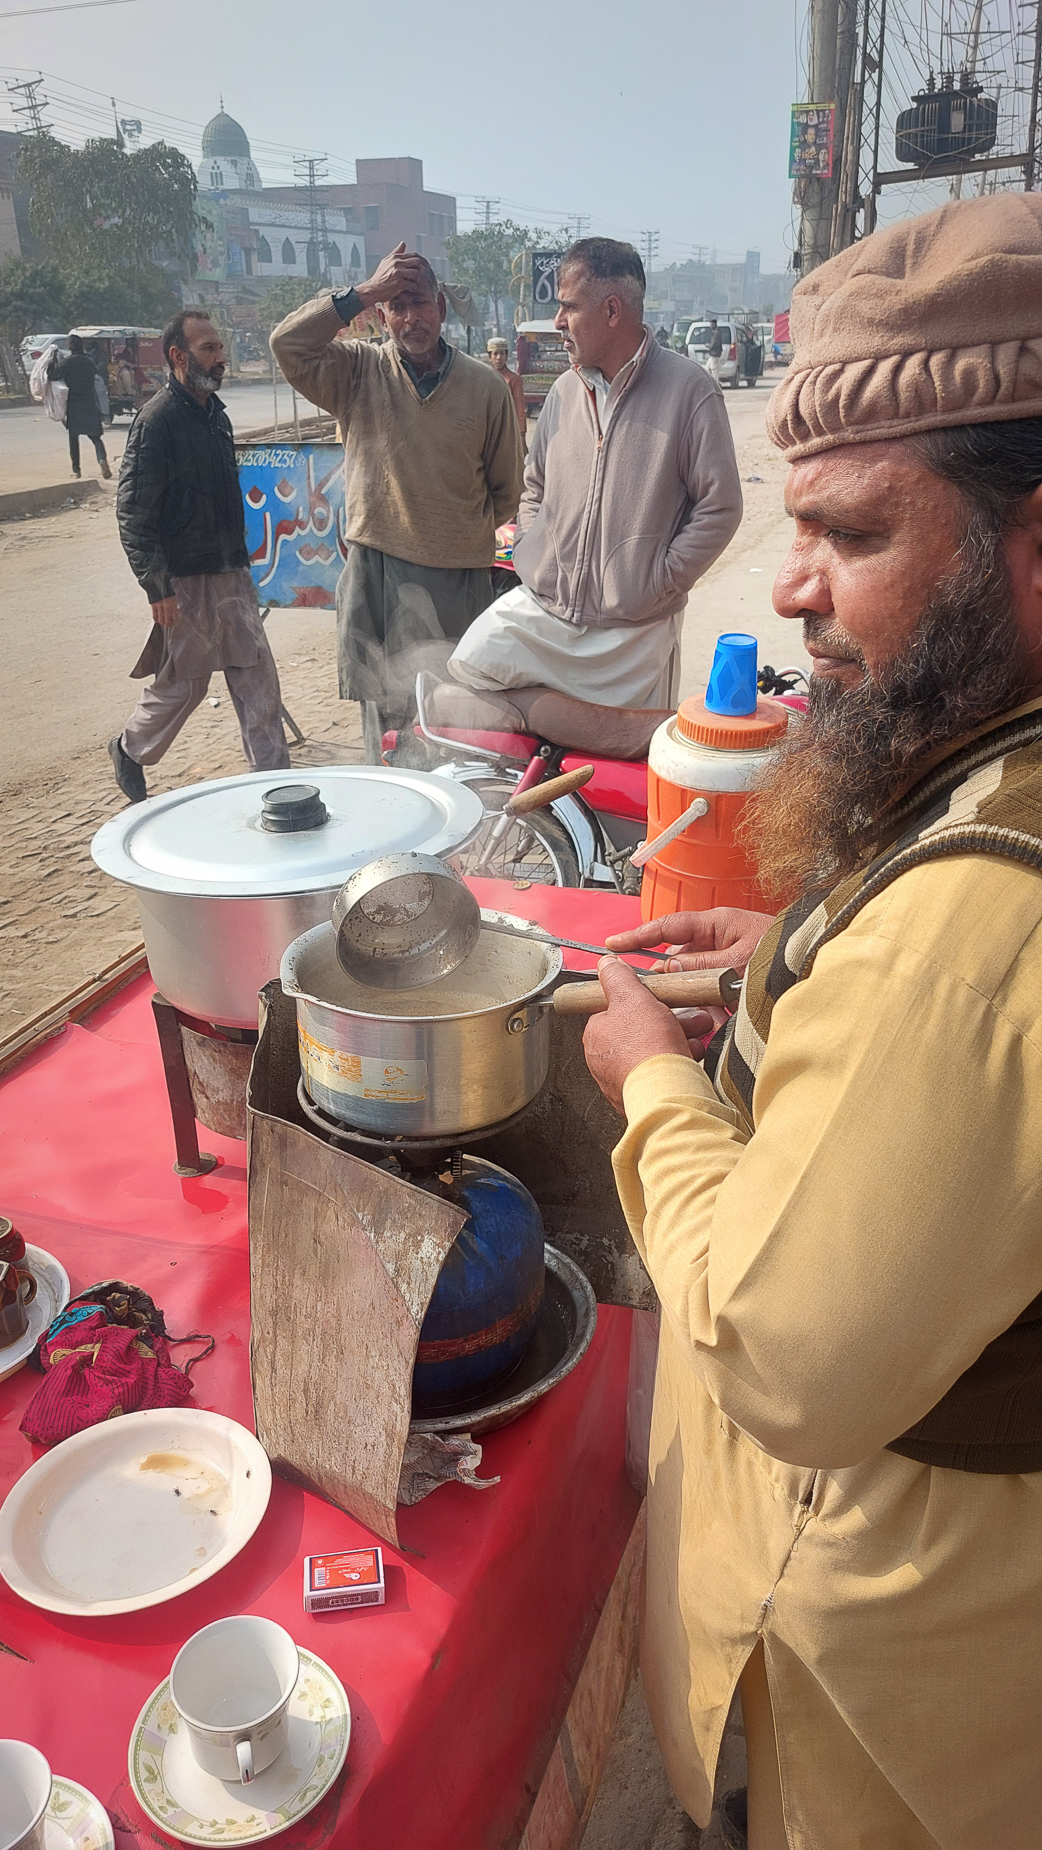 <span  class="uc_style_uc_tiles_grid_image_elementor_uc_items_attribute_title" style="color:#ffffff;">Important: having a chai or masala team on the streets</span>